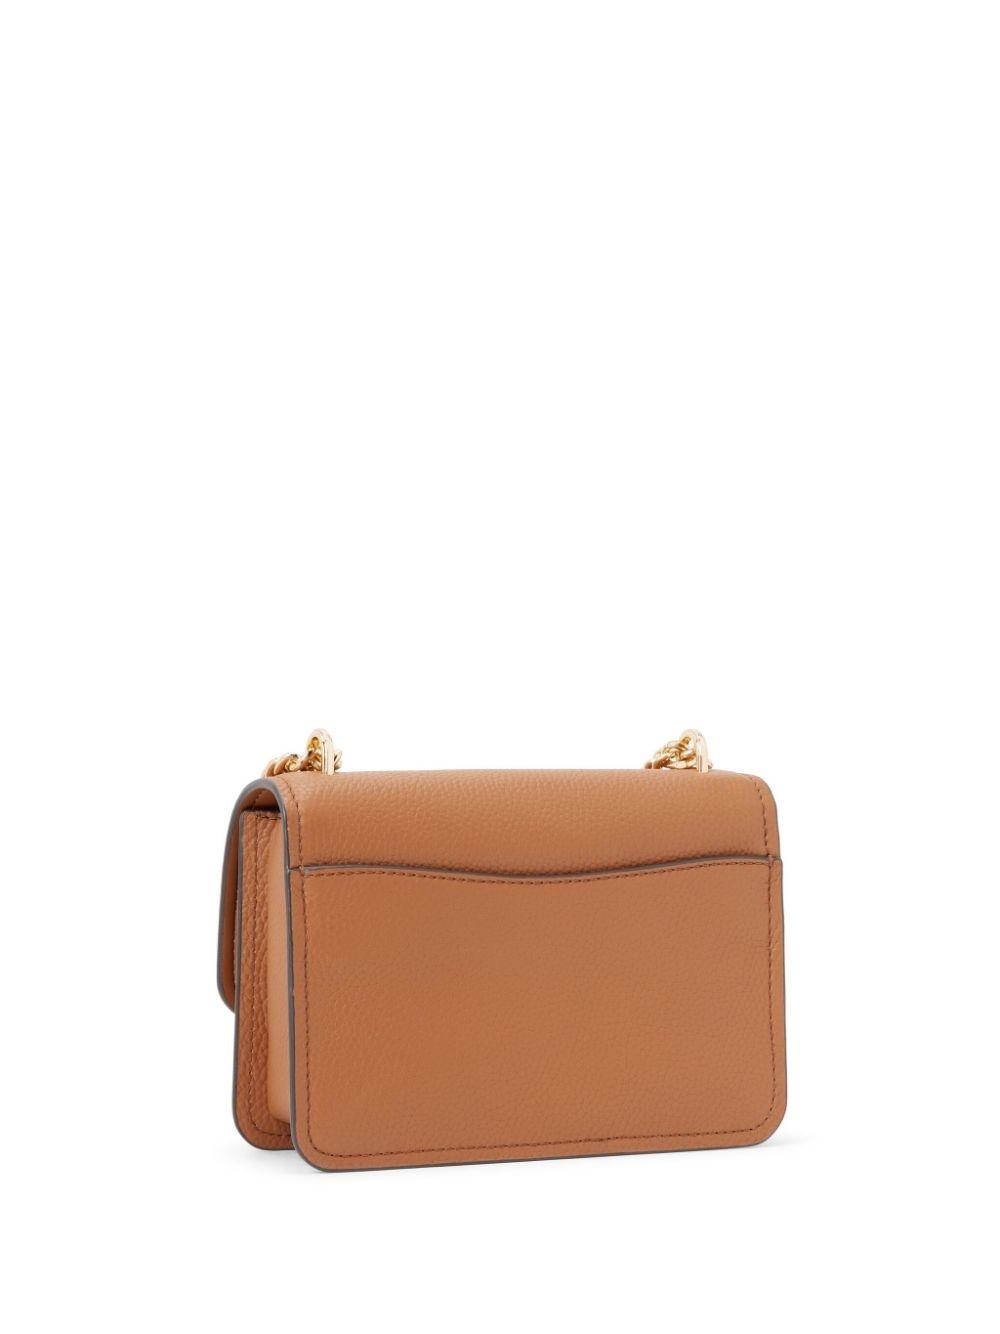 Bolso Michael Kors Claire Luggage Marrón